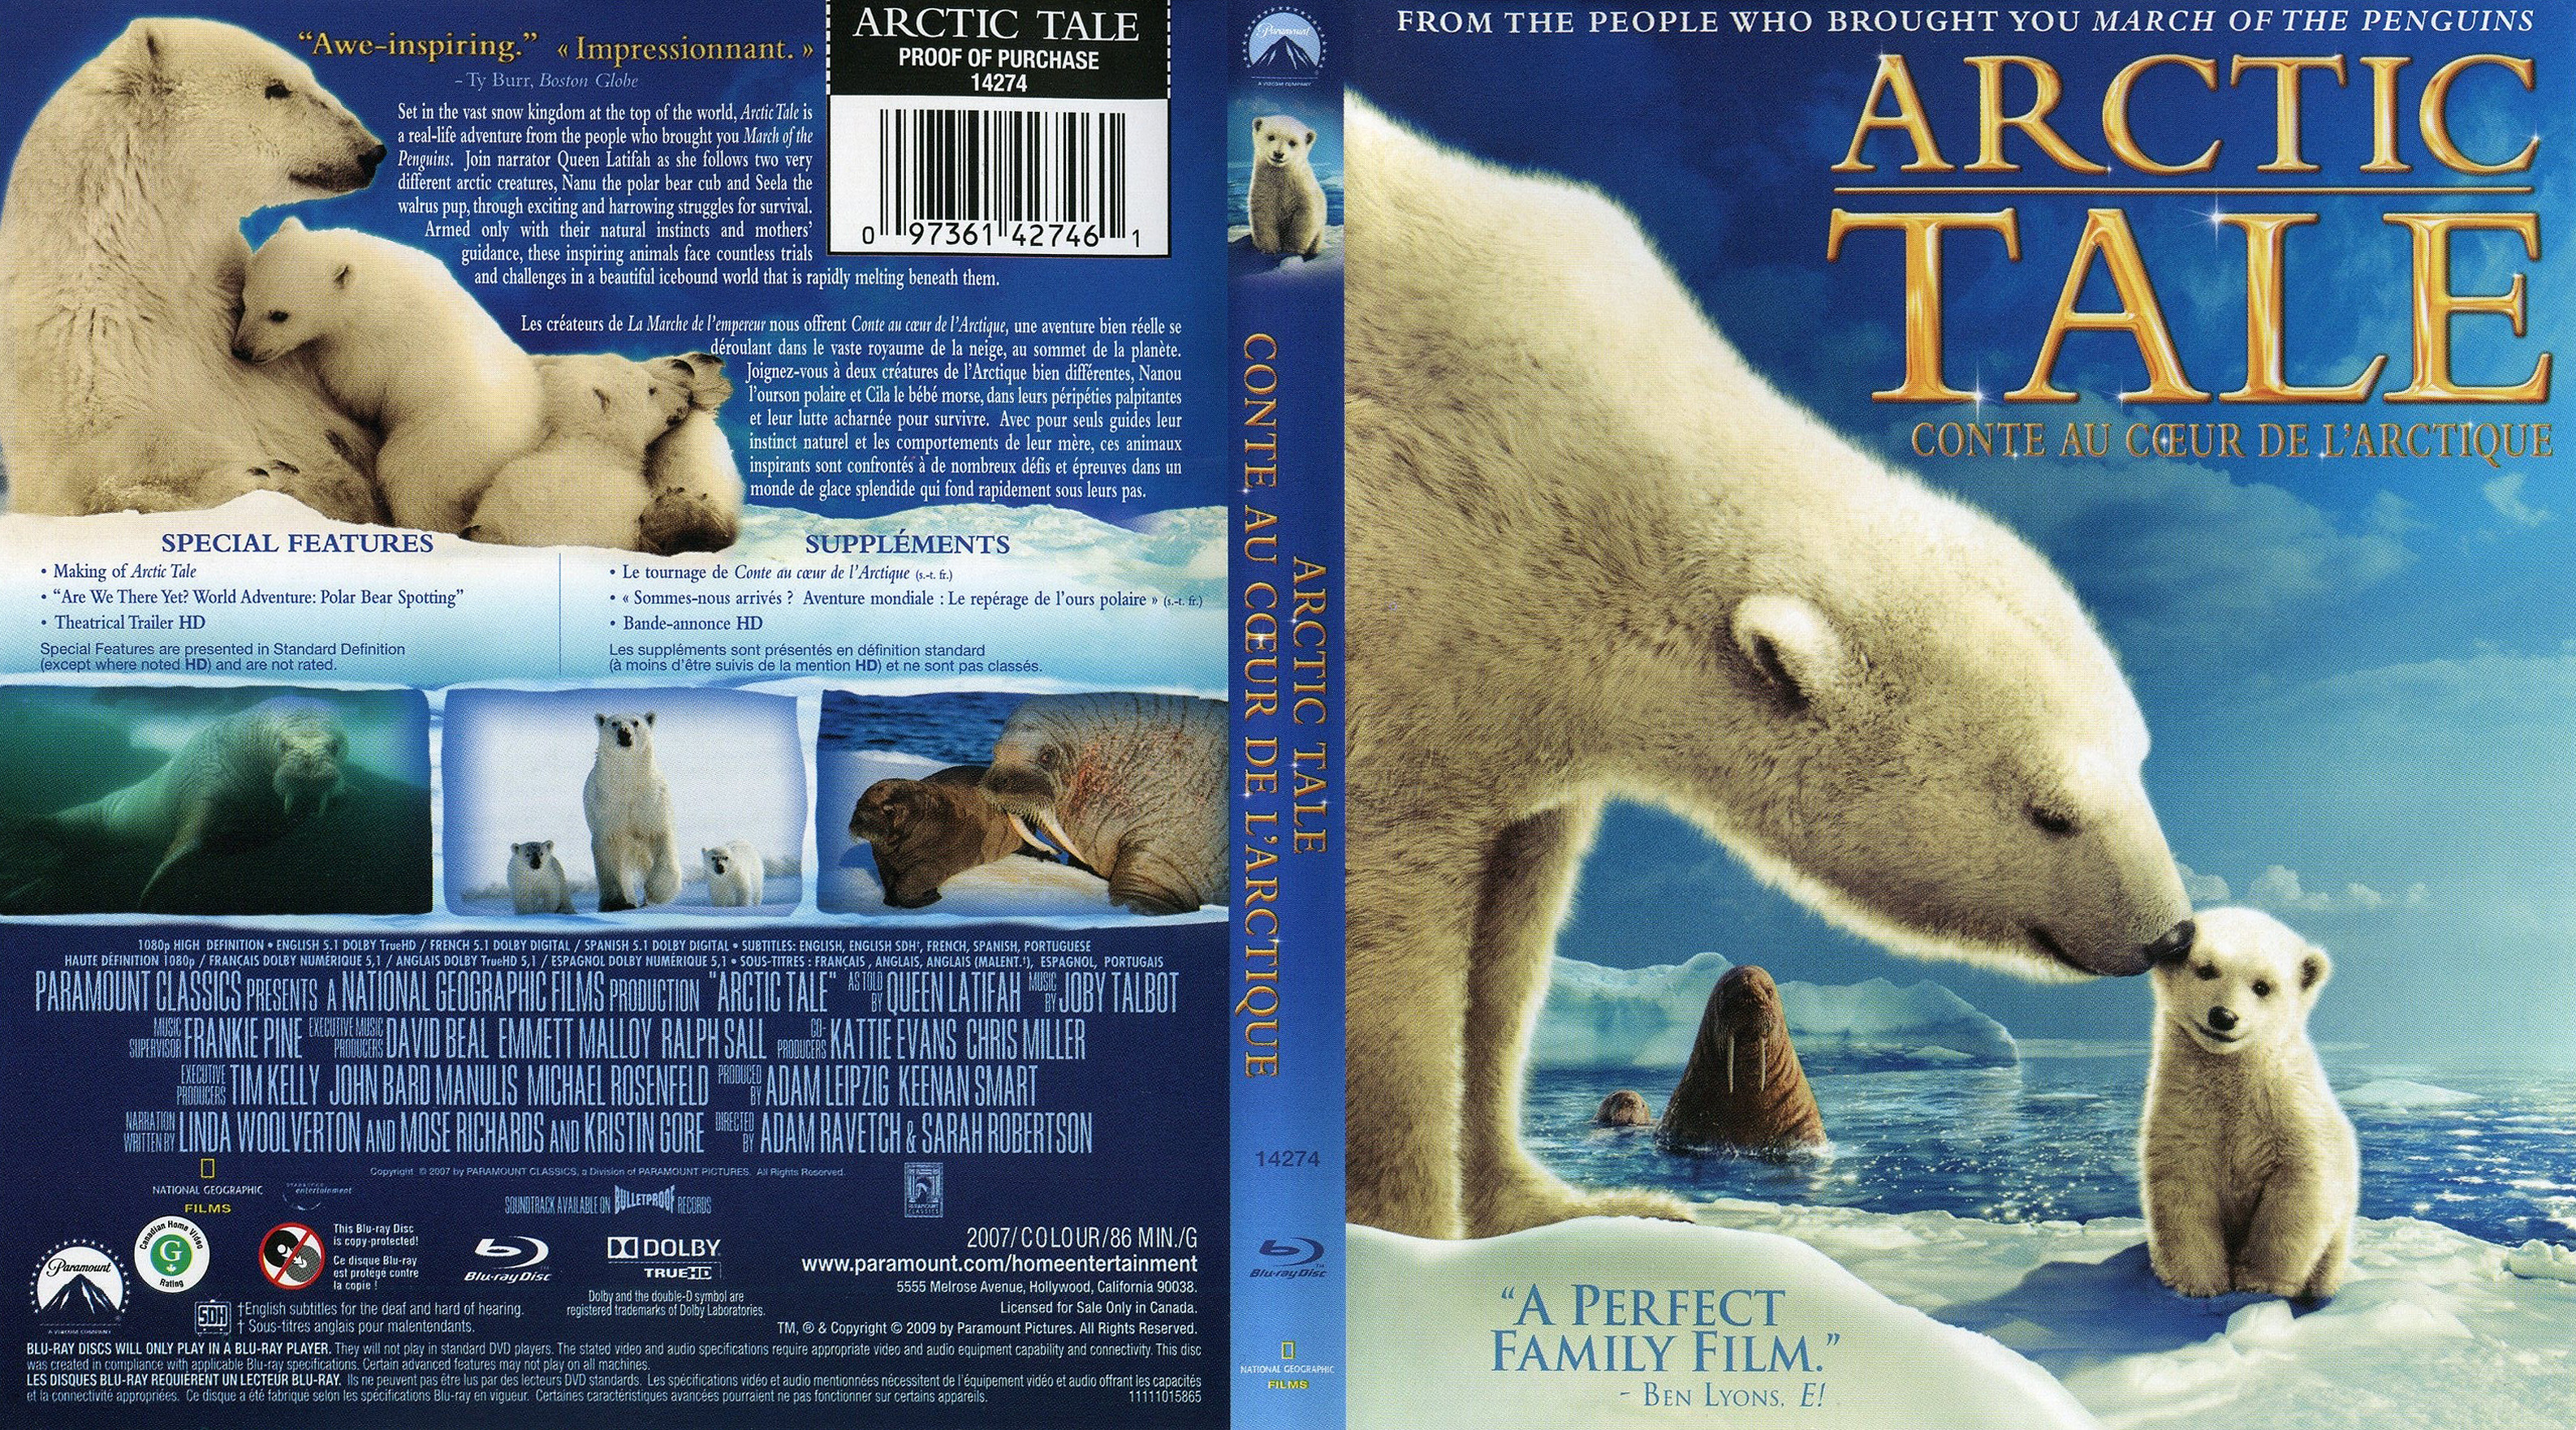 Jaquette DVD Artic tale (Canadienne) (BLU-RAY)